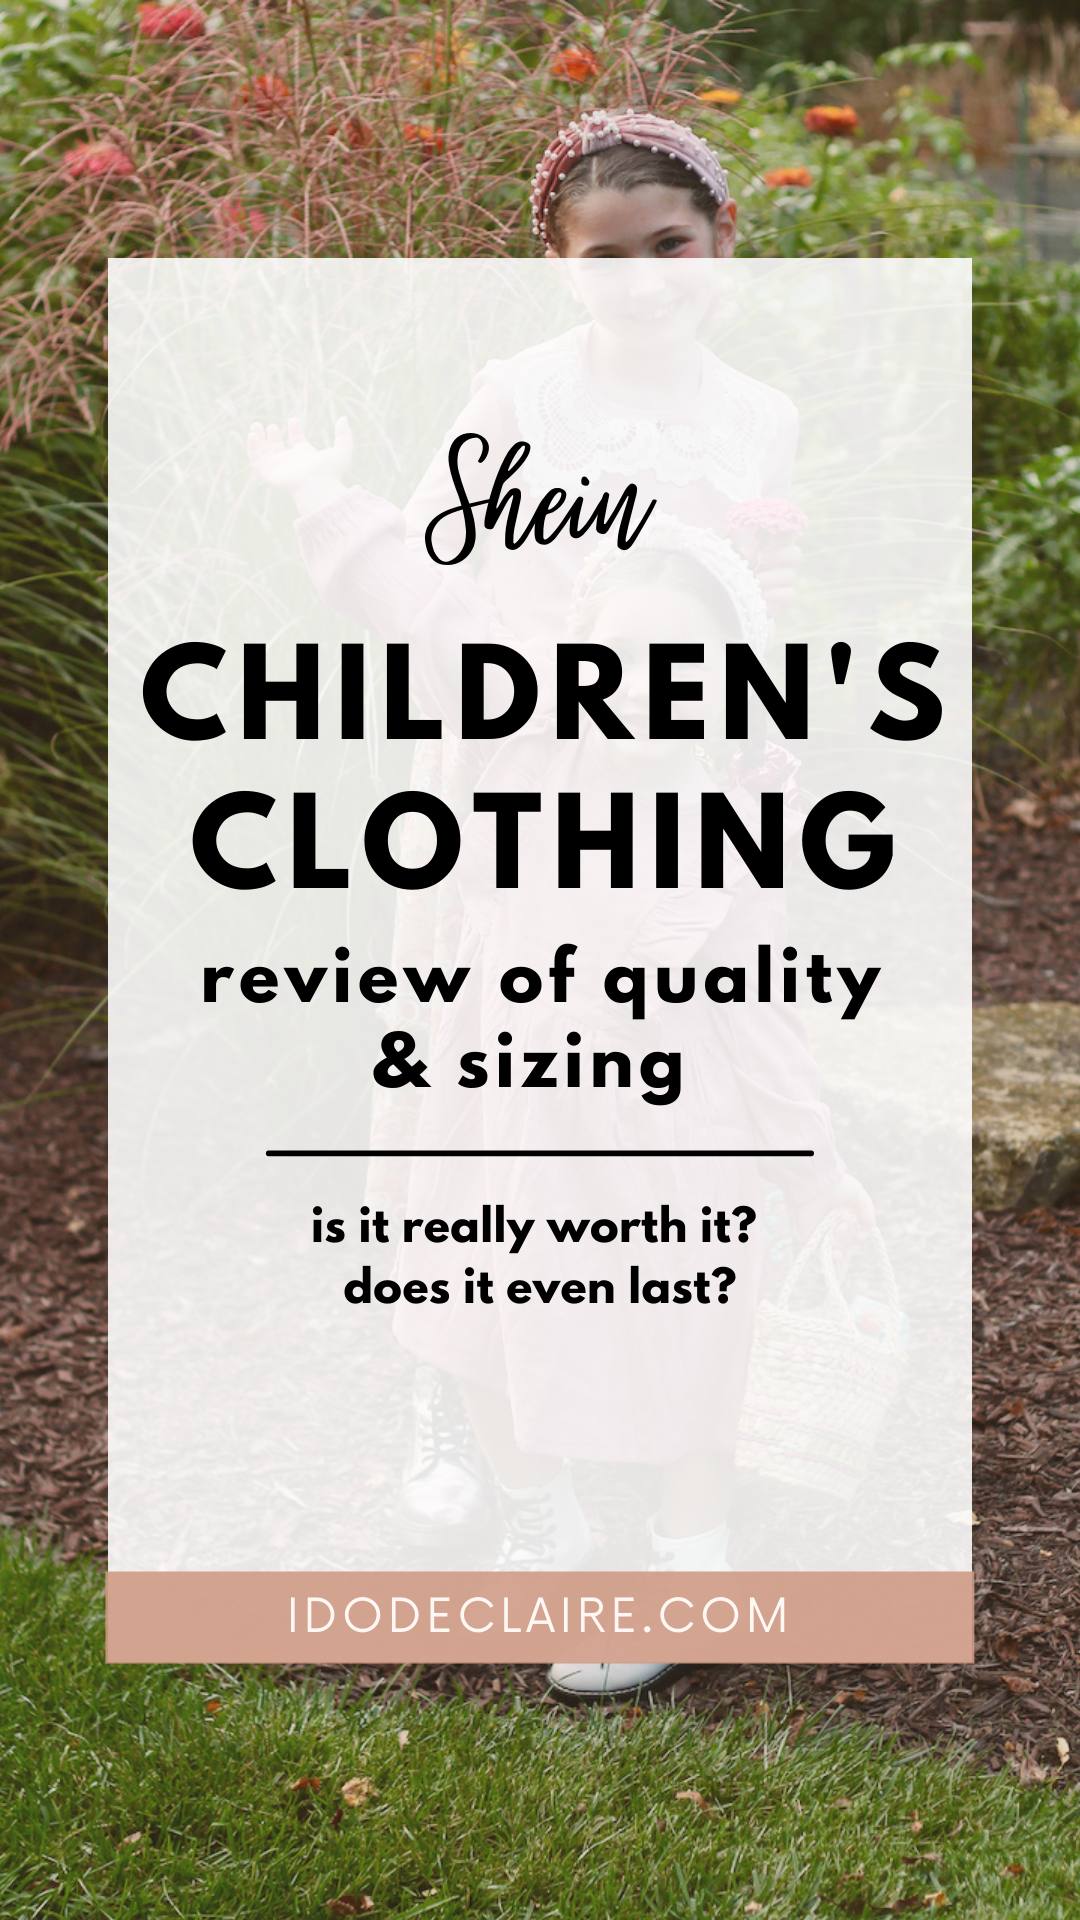 SHEIN REVIEW and SHOPPING TIPS